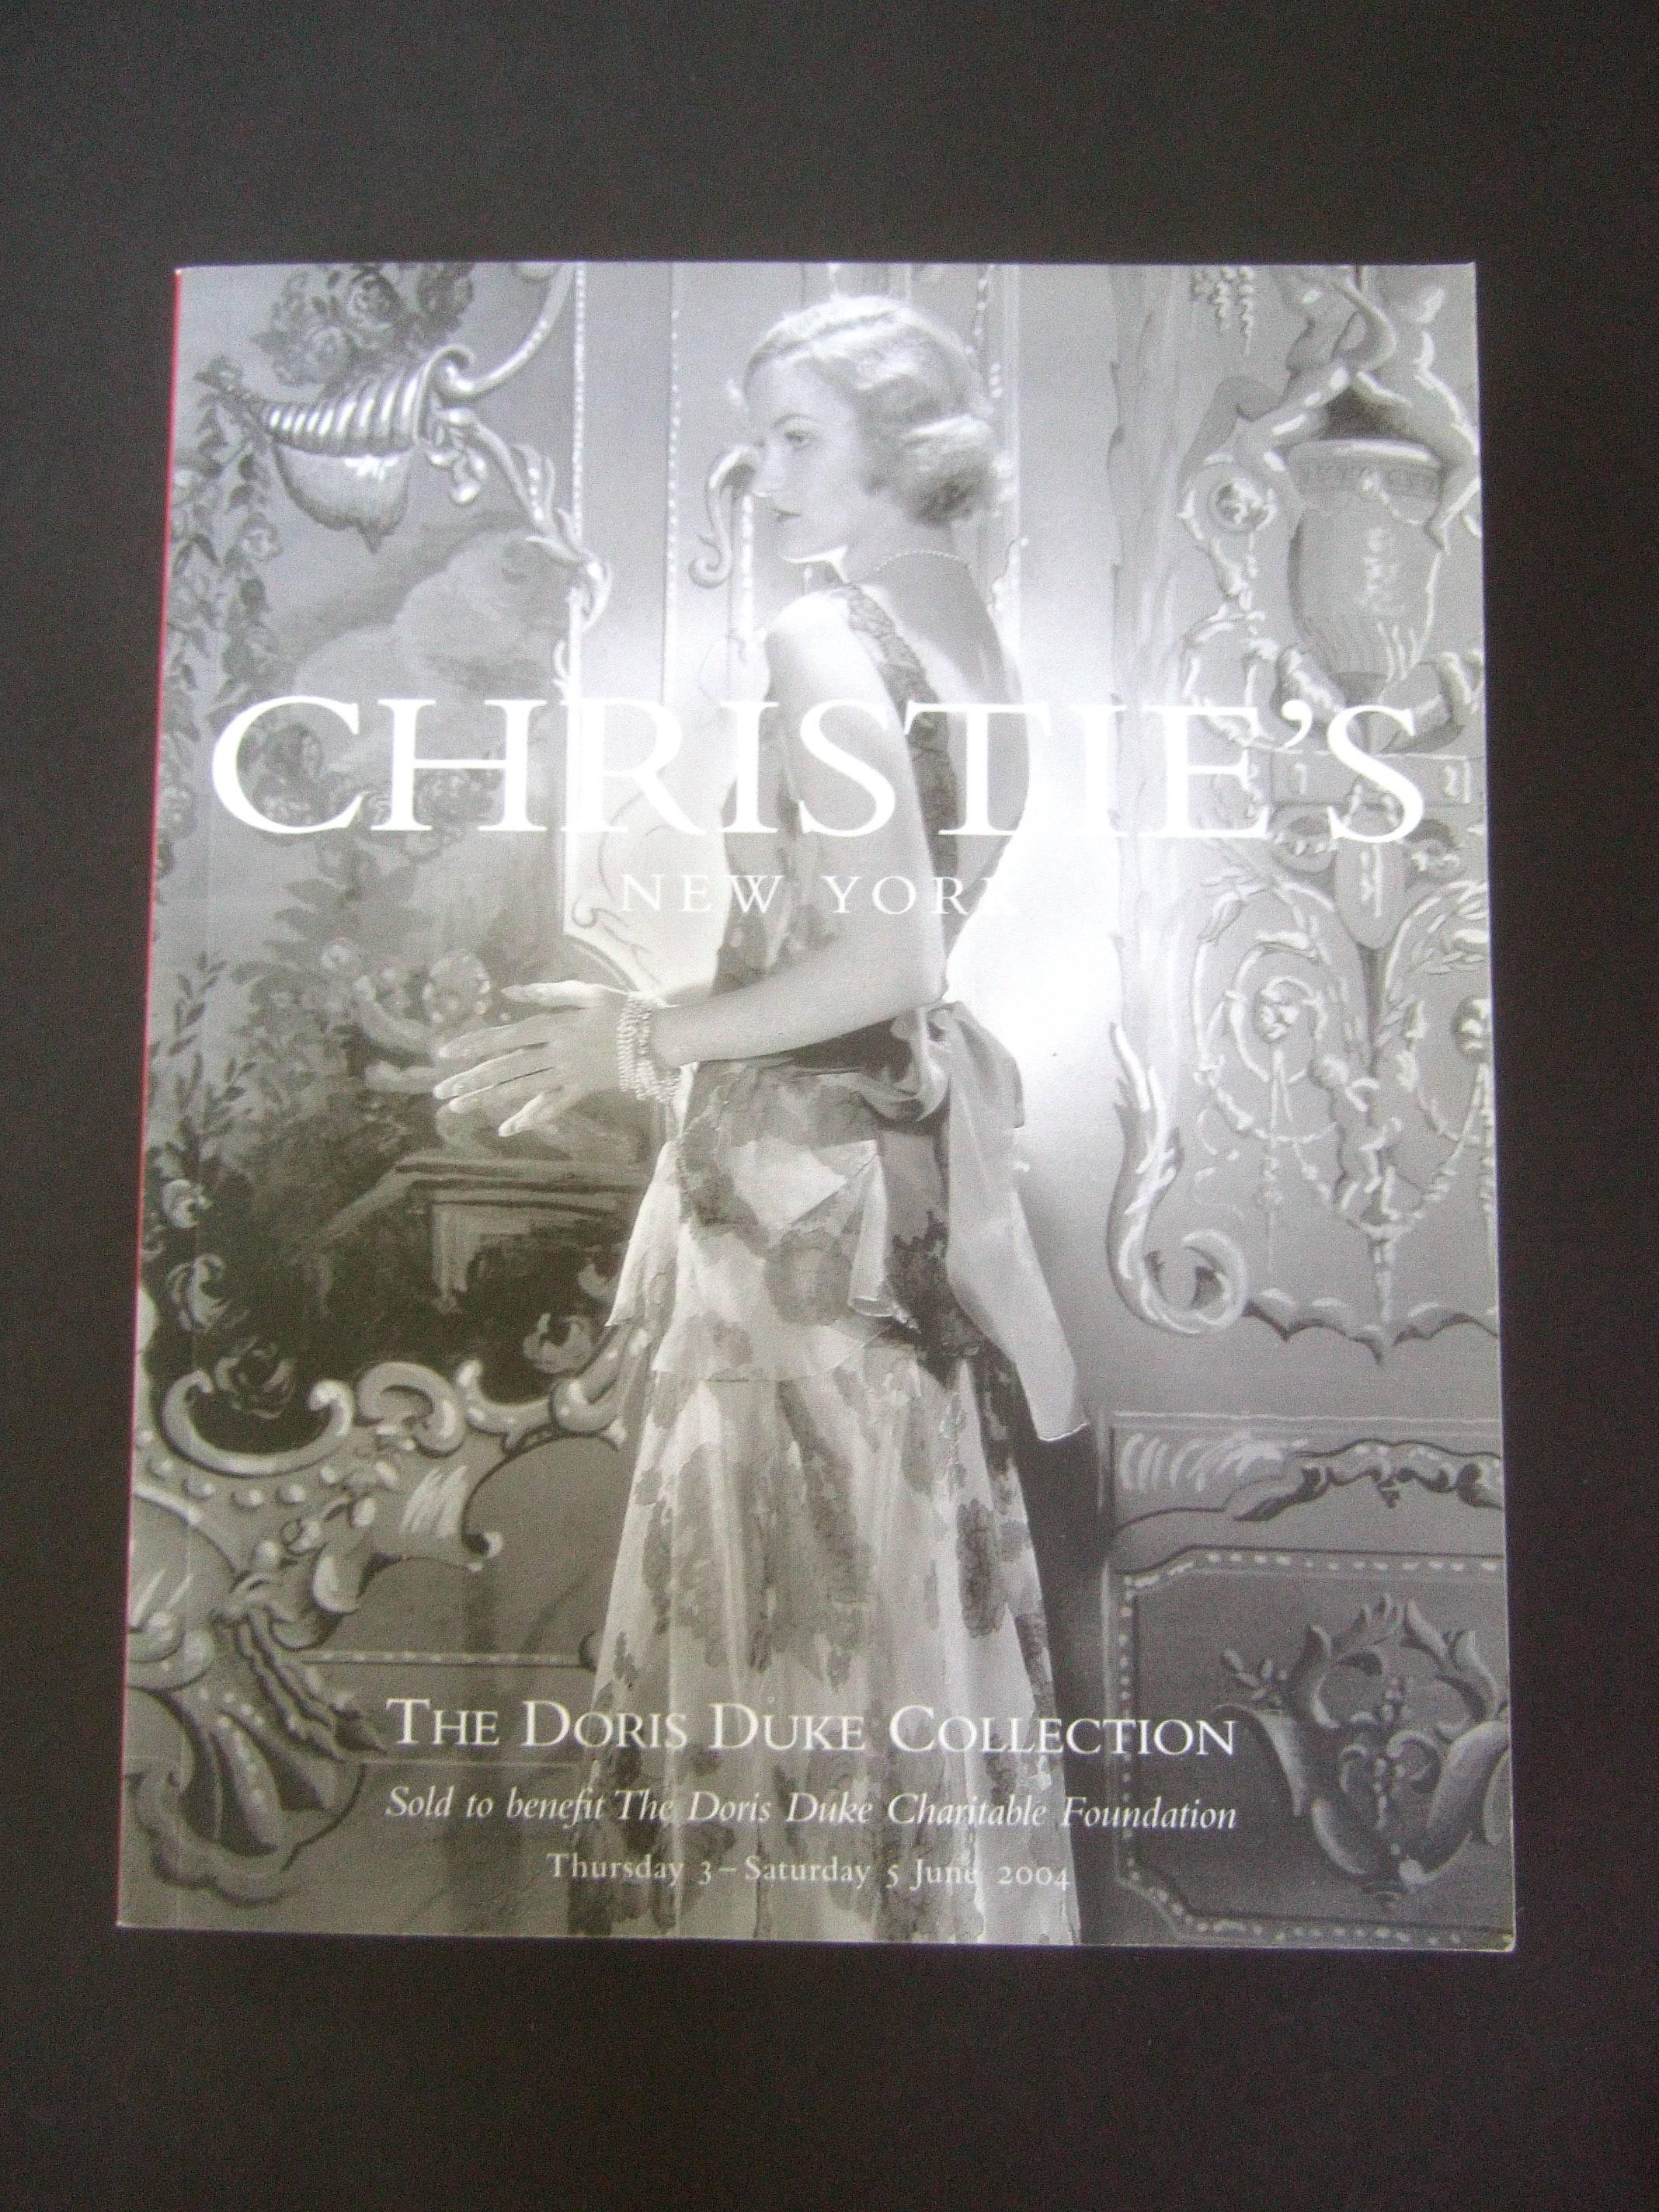 Christie's Doris Duke estate catalogues in box c 2014
The collection of three catalogues provides a rare  
glimpse into the lavish glamorous lifestyle of Doris Duke;
features her vast collections cultivated from her exotic travels 
 
One of the